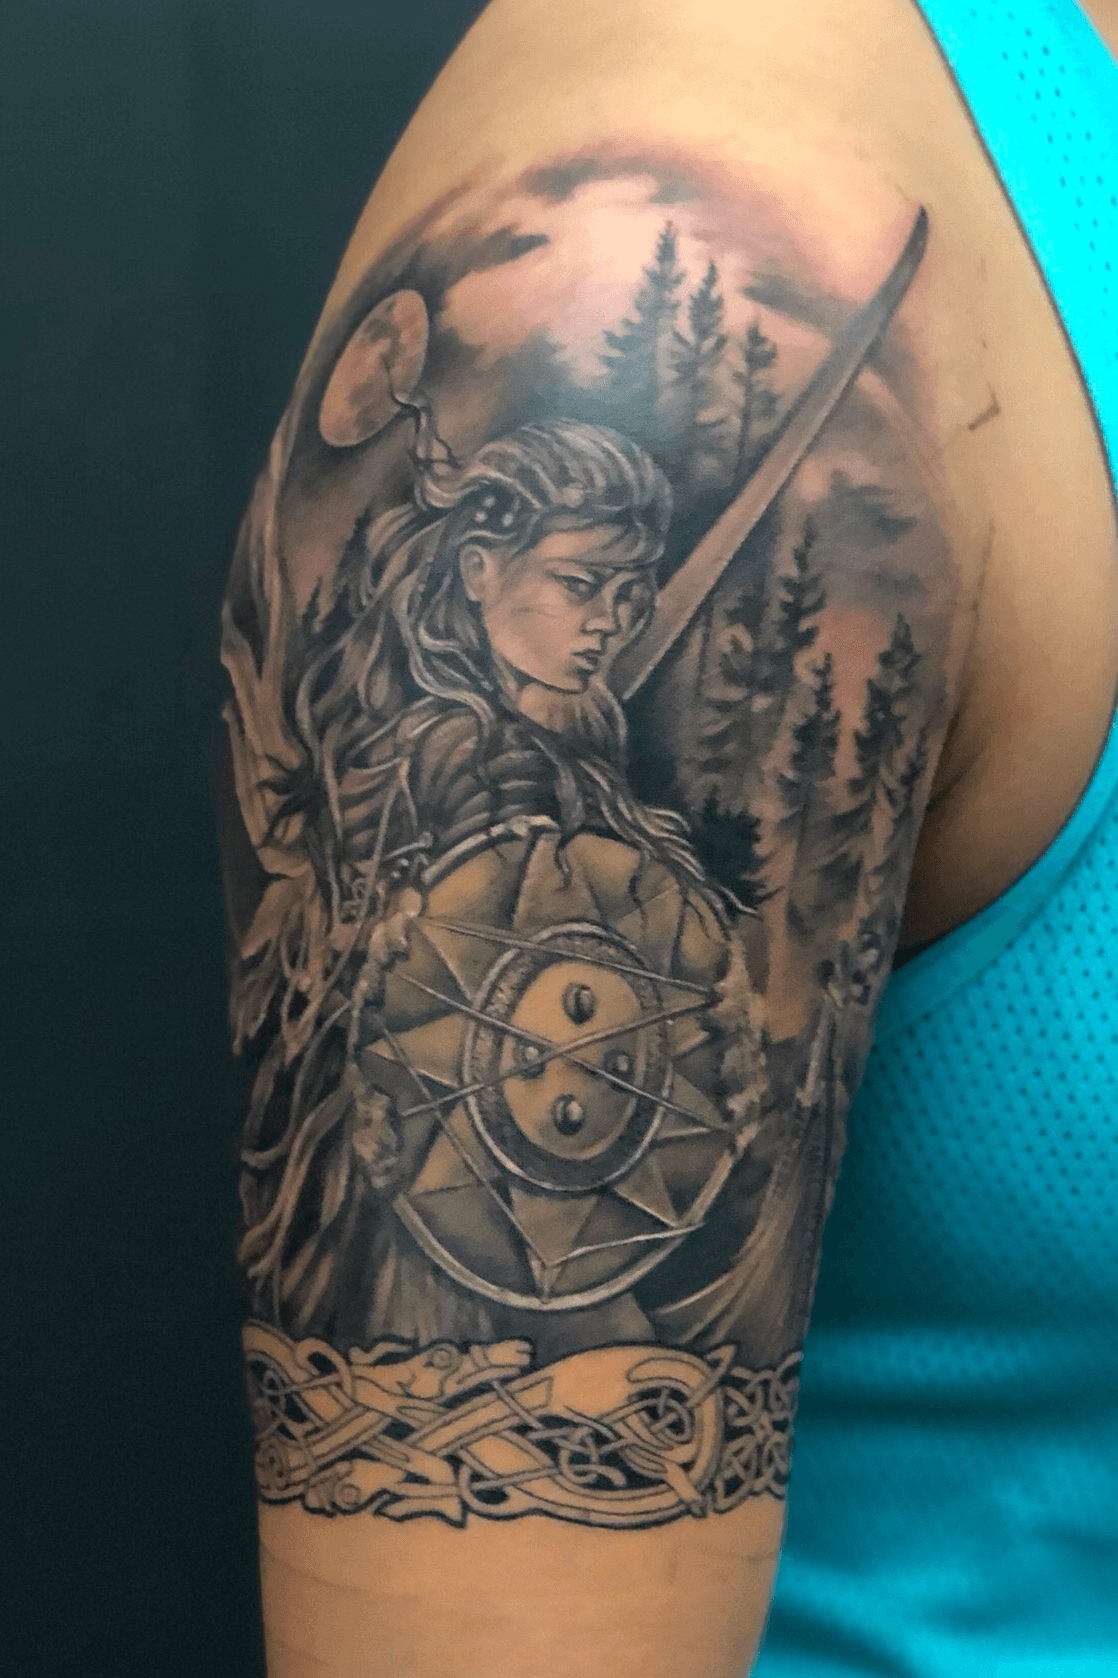 Viking shield maiden by Kody Richard at Lost Soul Studio  Racine  Wisconsin 23 hours over 3 sessions  Valkyrie tattoo Viking shield maiden  Nordic tattoo